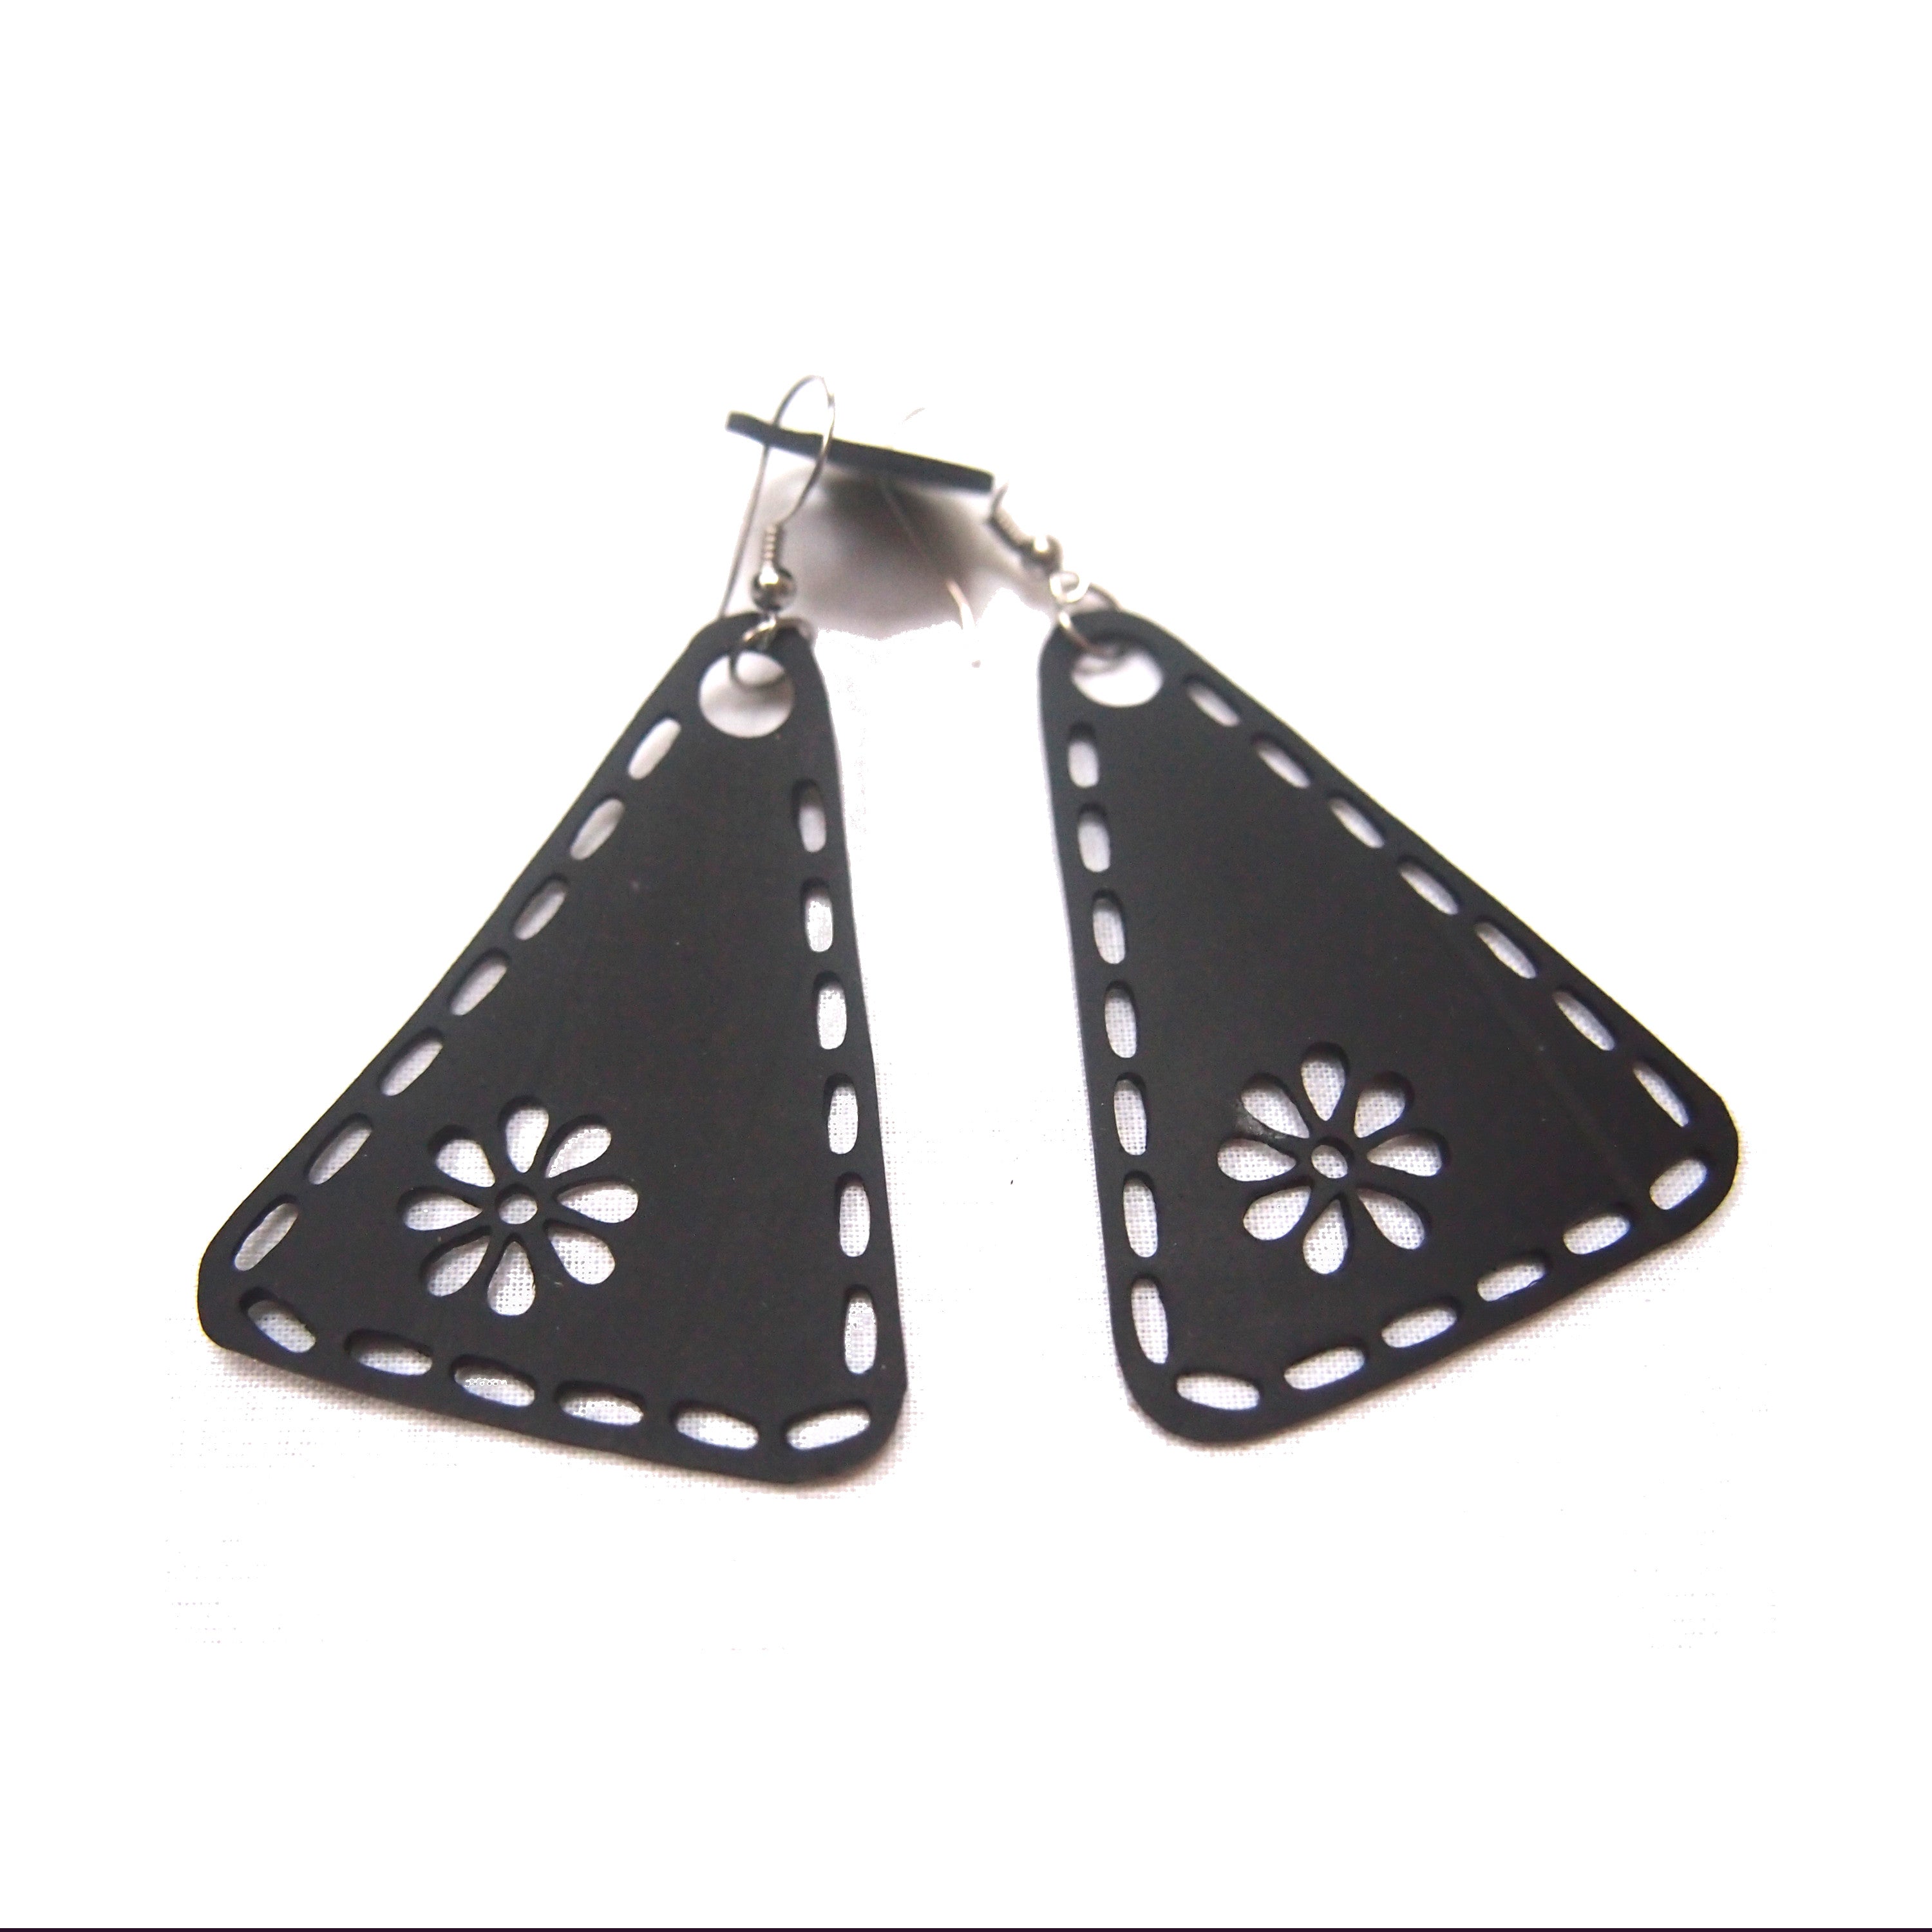 Unique Recycled Rubber Triangle Earrings by Paguro Upcycle